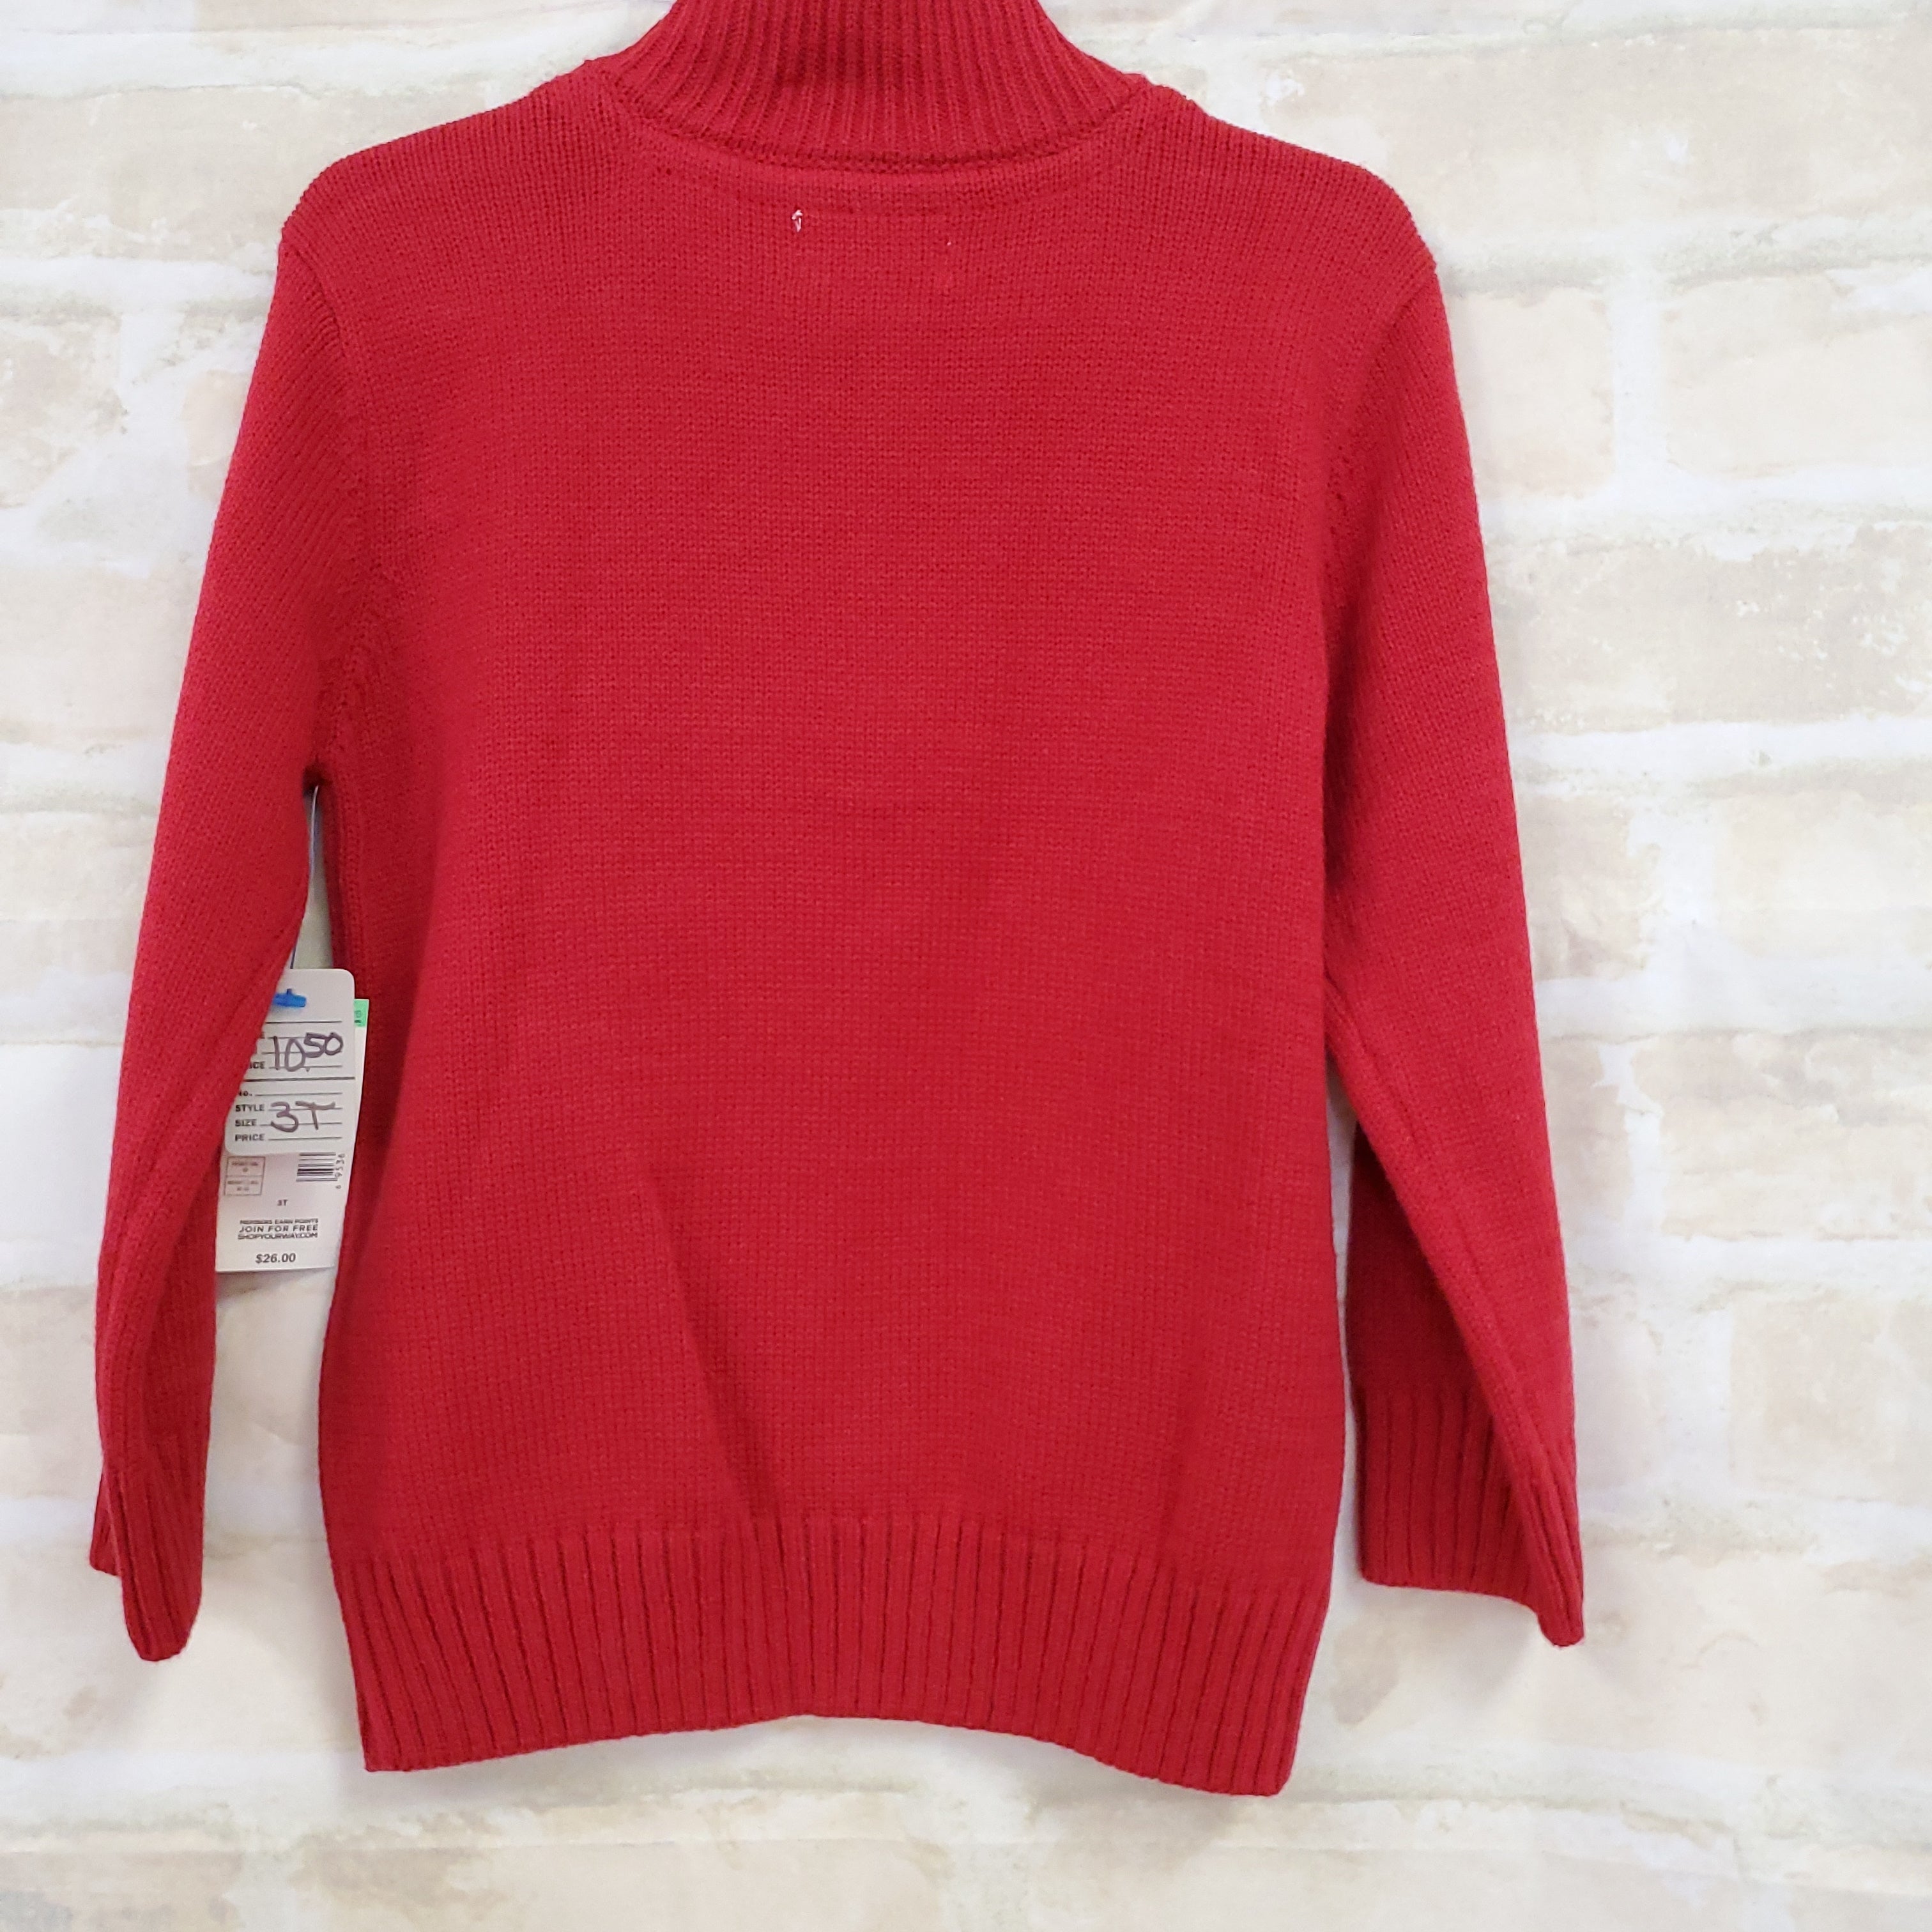 Toughskins boys New sweater red L/S zips pullover 3T